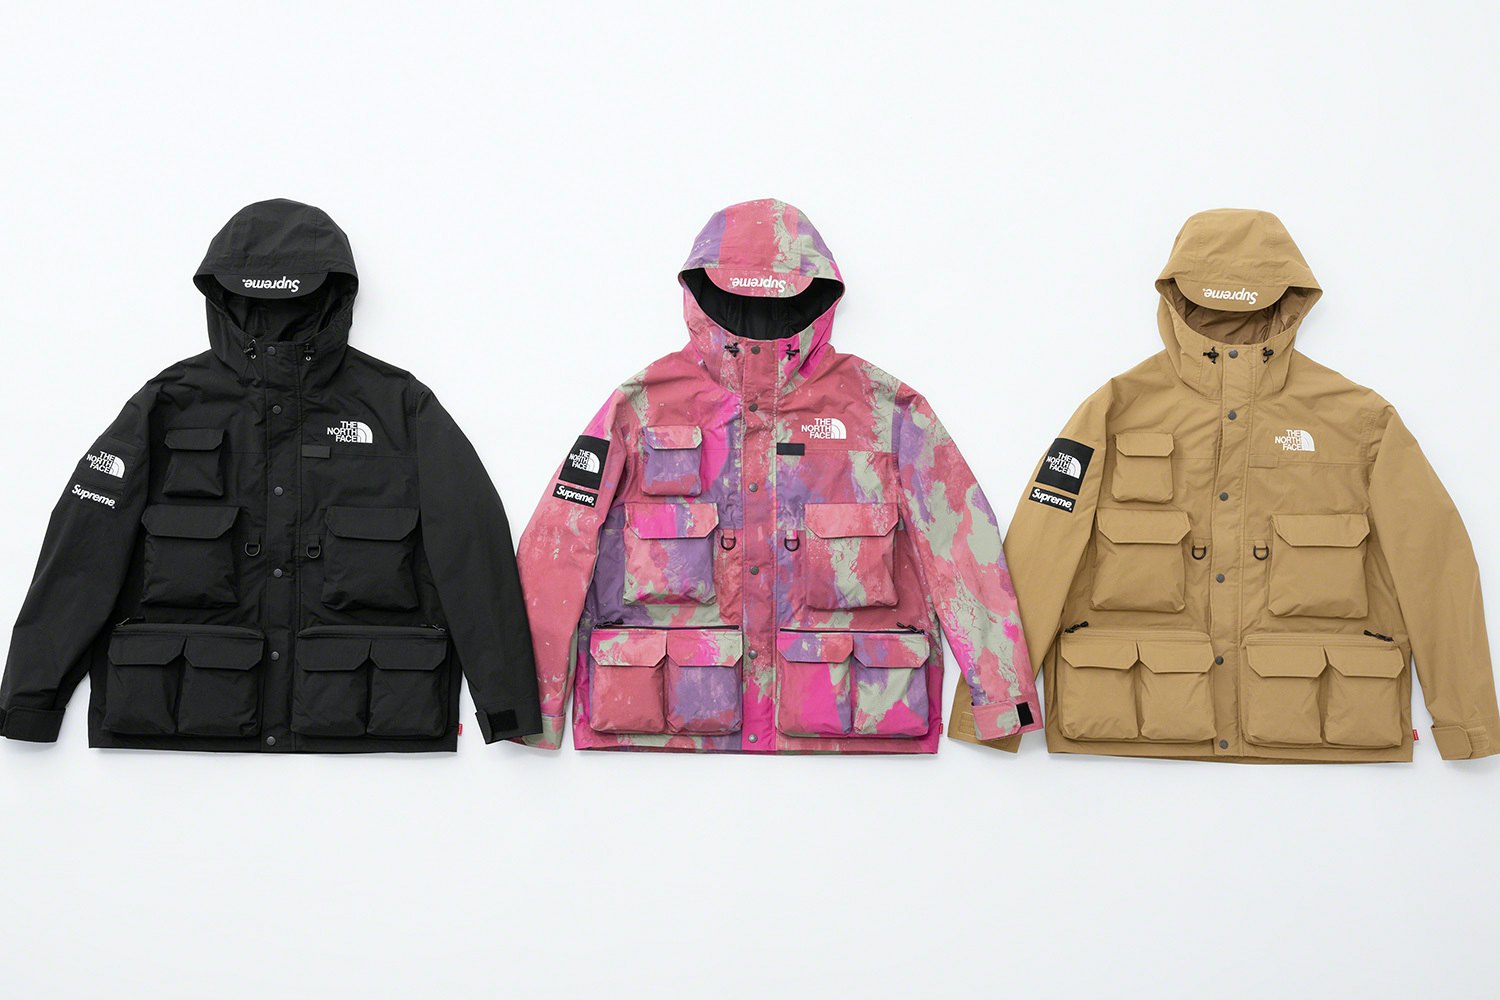 Supreme and The North Face somehow manage to make zip-off cargo